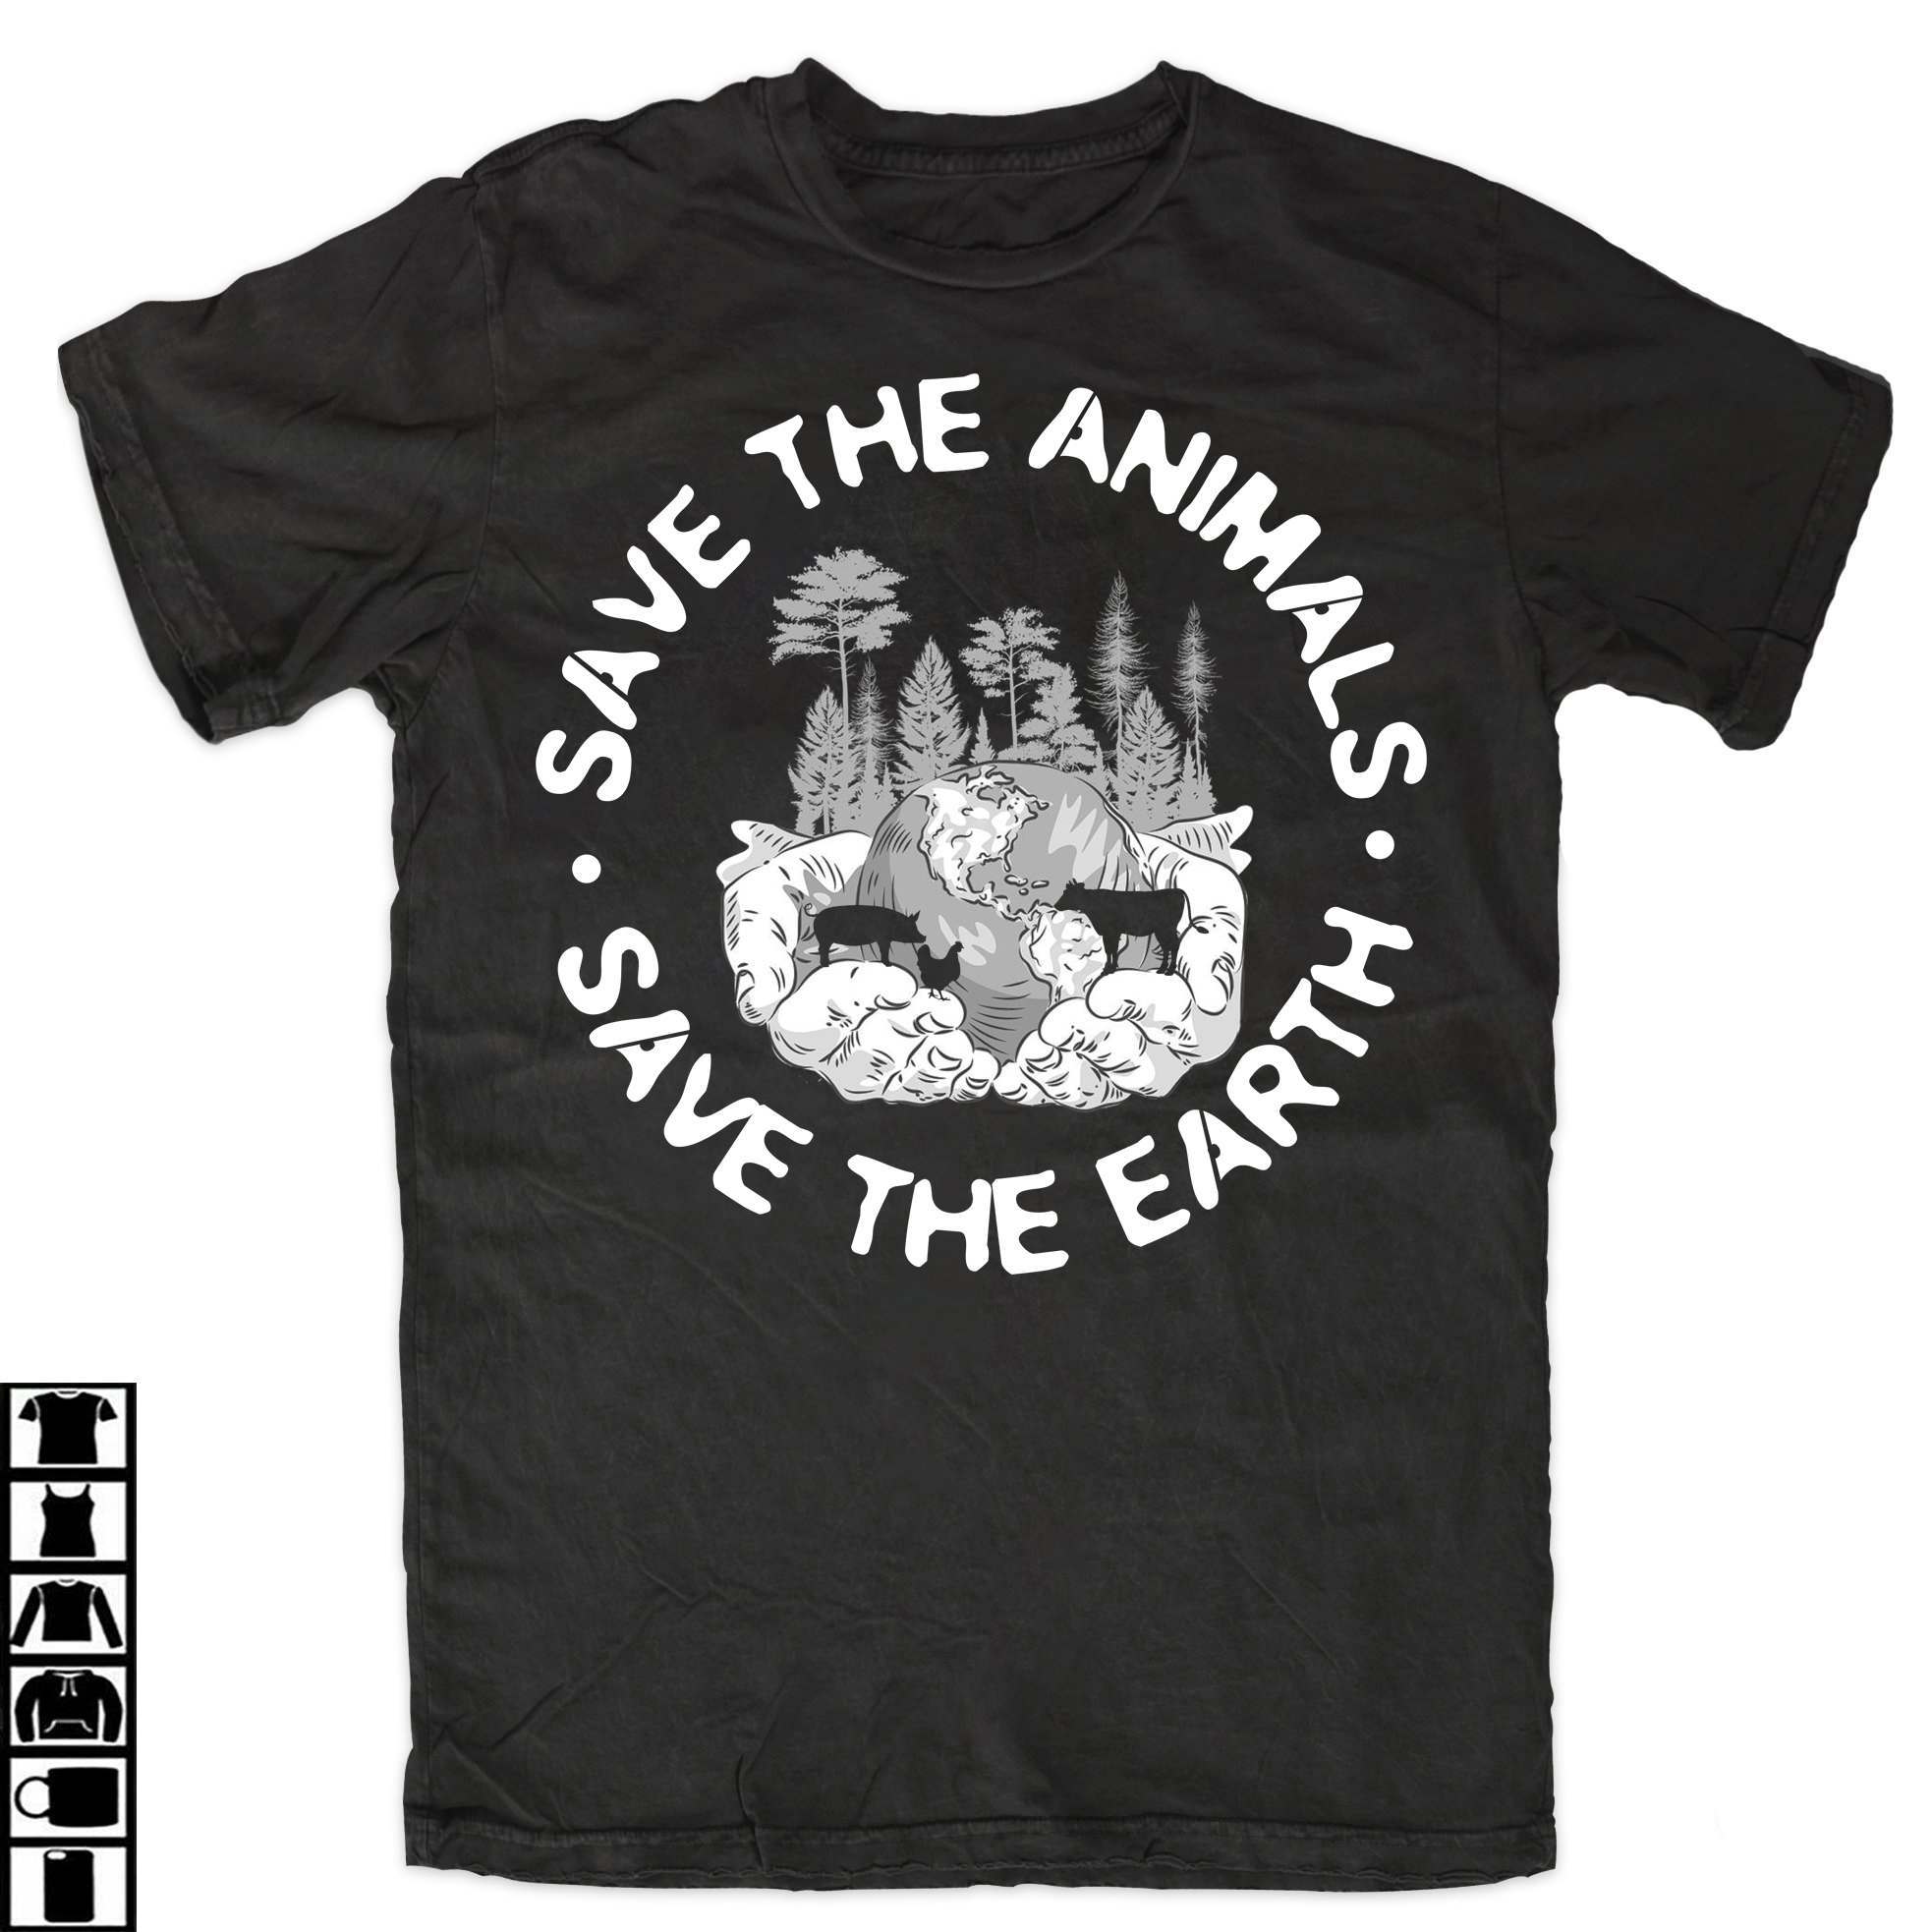 Save the animals save the earth - Animal lover